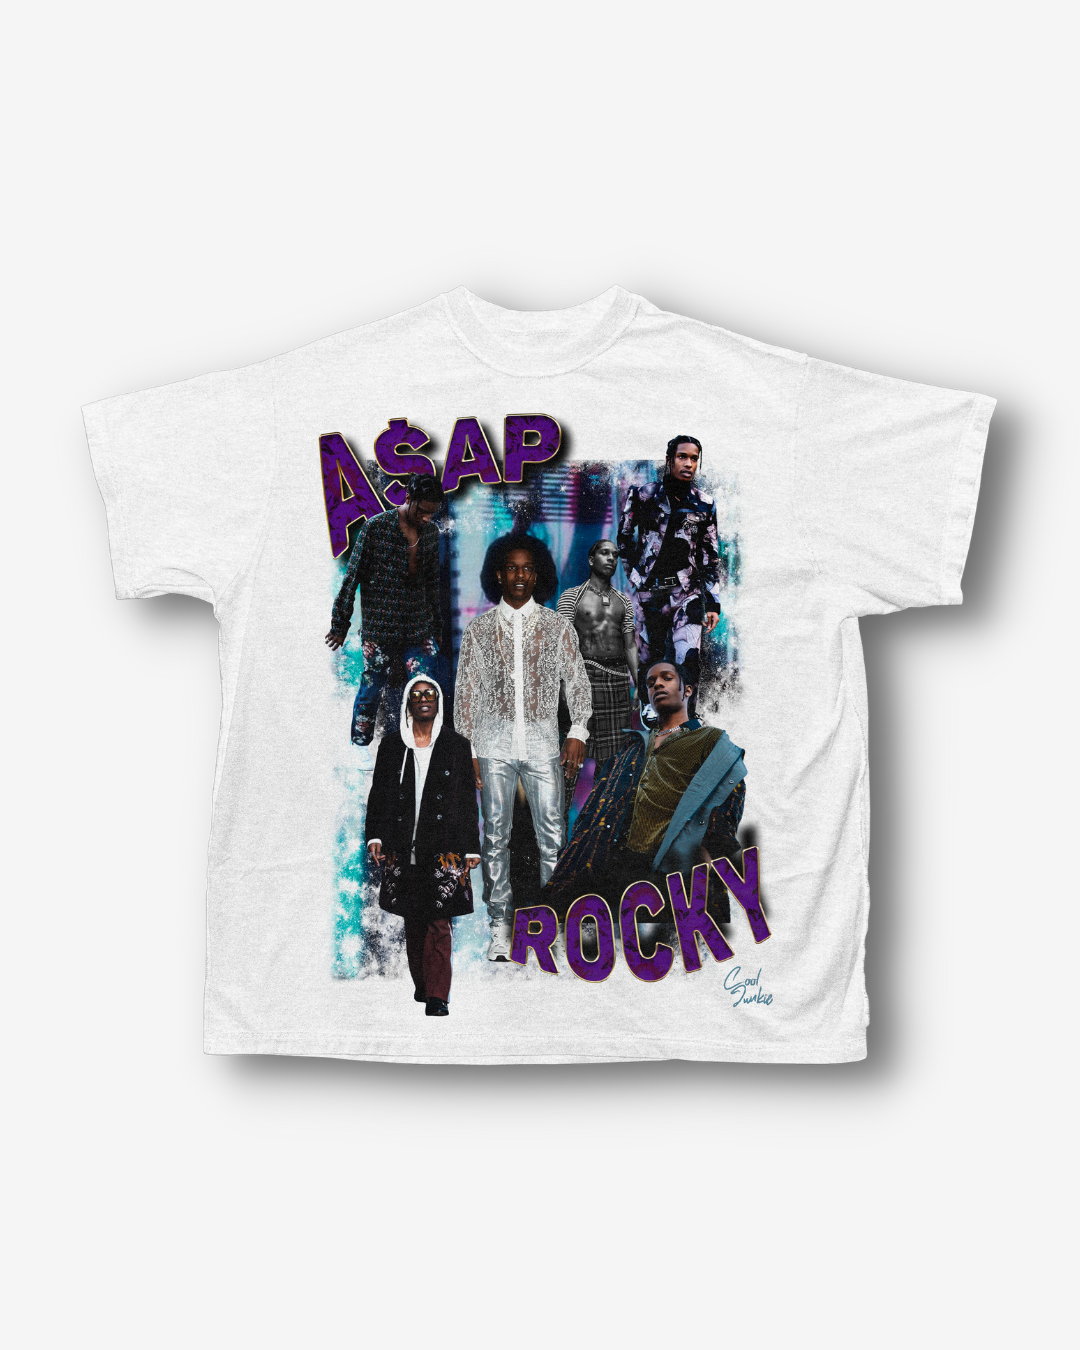 White A$AP Rocky Tee with purple and blue as the main colors in the design